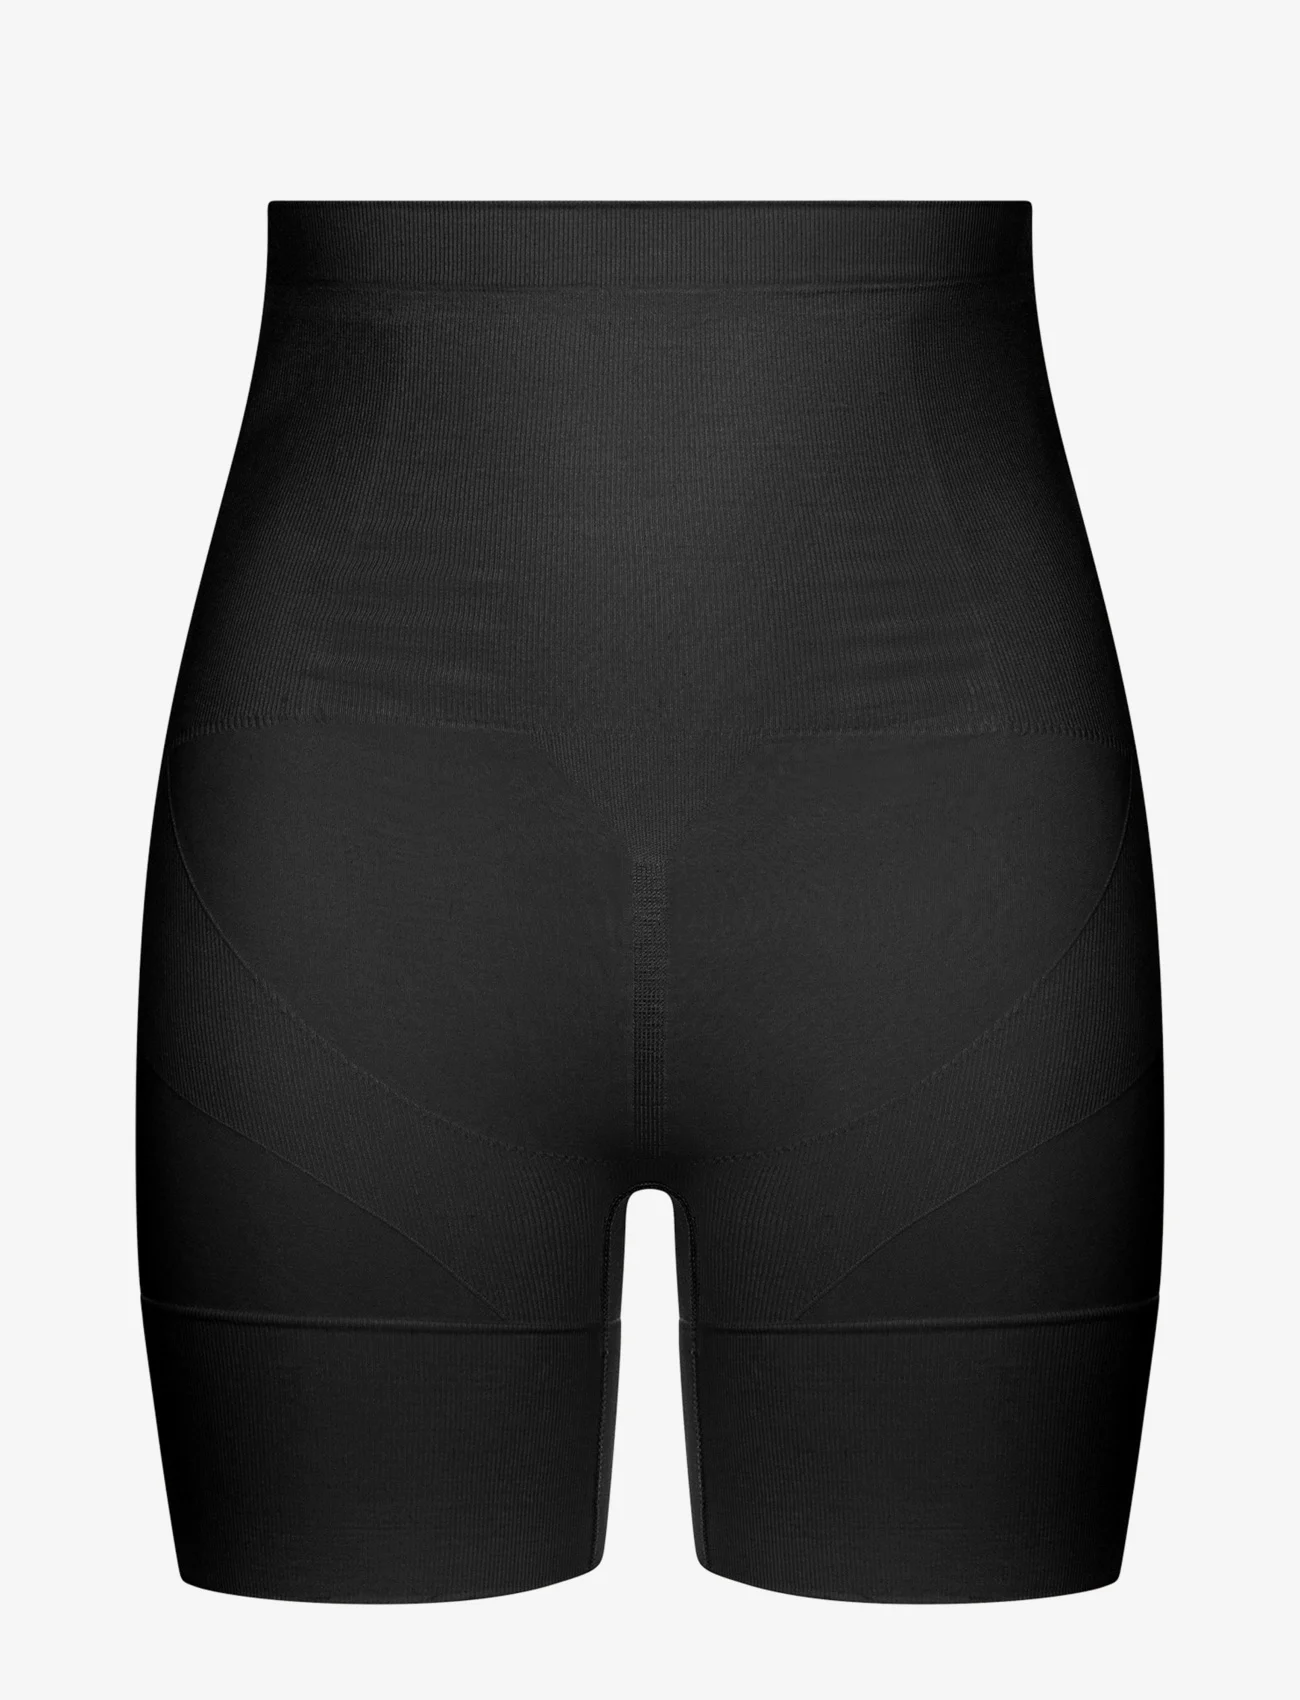 Dorina - ABSOLUTE SCULPT Shaping_Shorts - lowest prices - black - 0